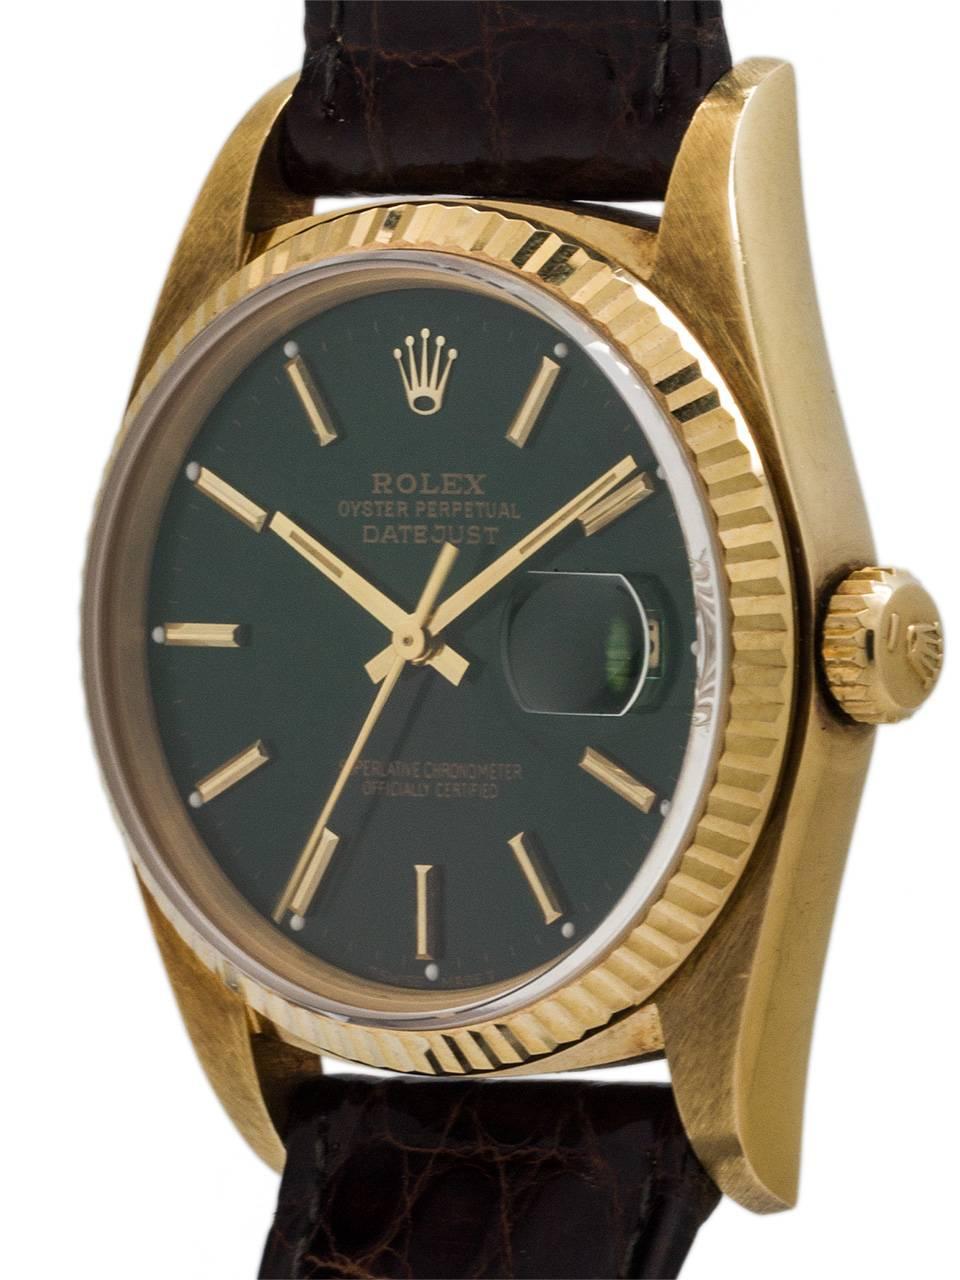 Rolex 18K Yellow Gold Datejust ref# 16238 serial# 8.2 million circa 1984. 36mm diameter Oyster case with fluted bezel and sapphire crystal. With distinctive custom colored rich “forest green” dial with applied gold indexes and gilt baton hands.